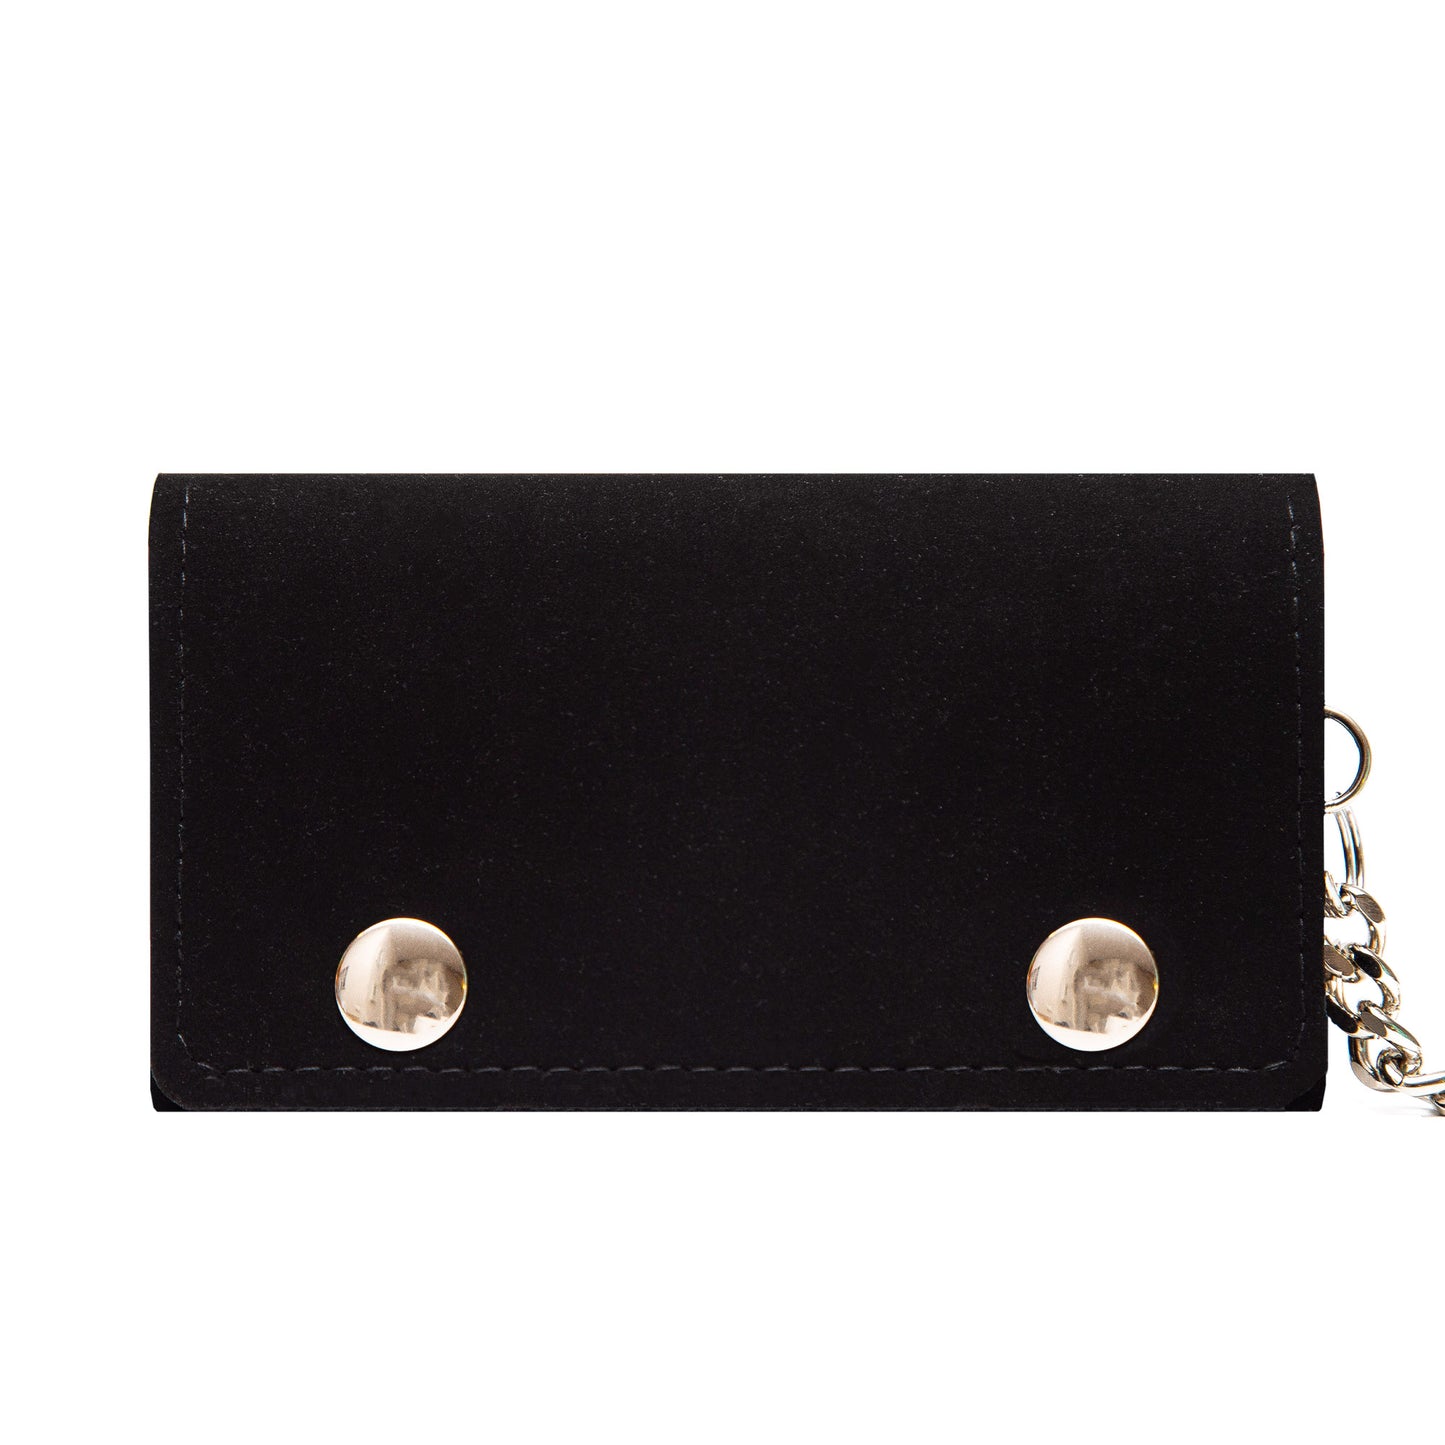 Handcrafted Biker Wallet with Detachable Chain - Cruelty-Free and Fashionably Functional - Black Faux Leather